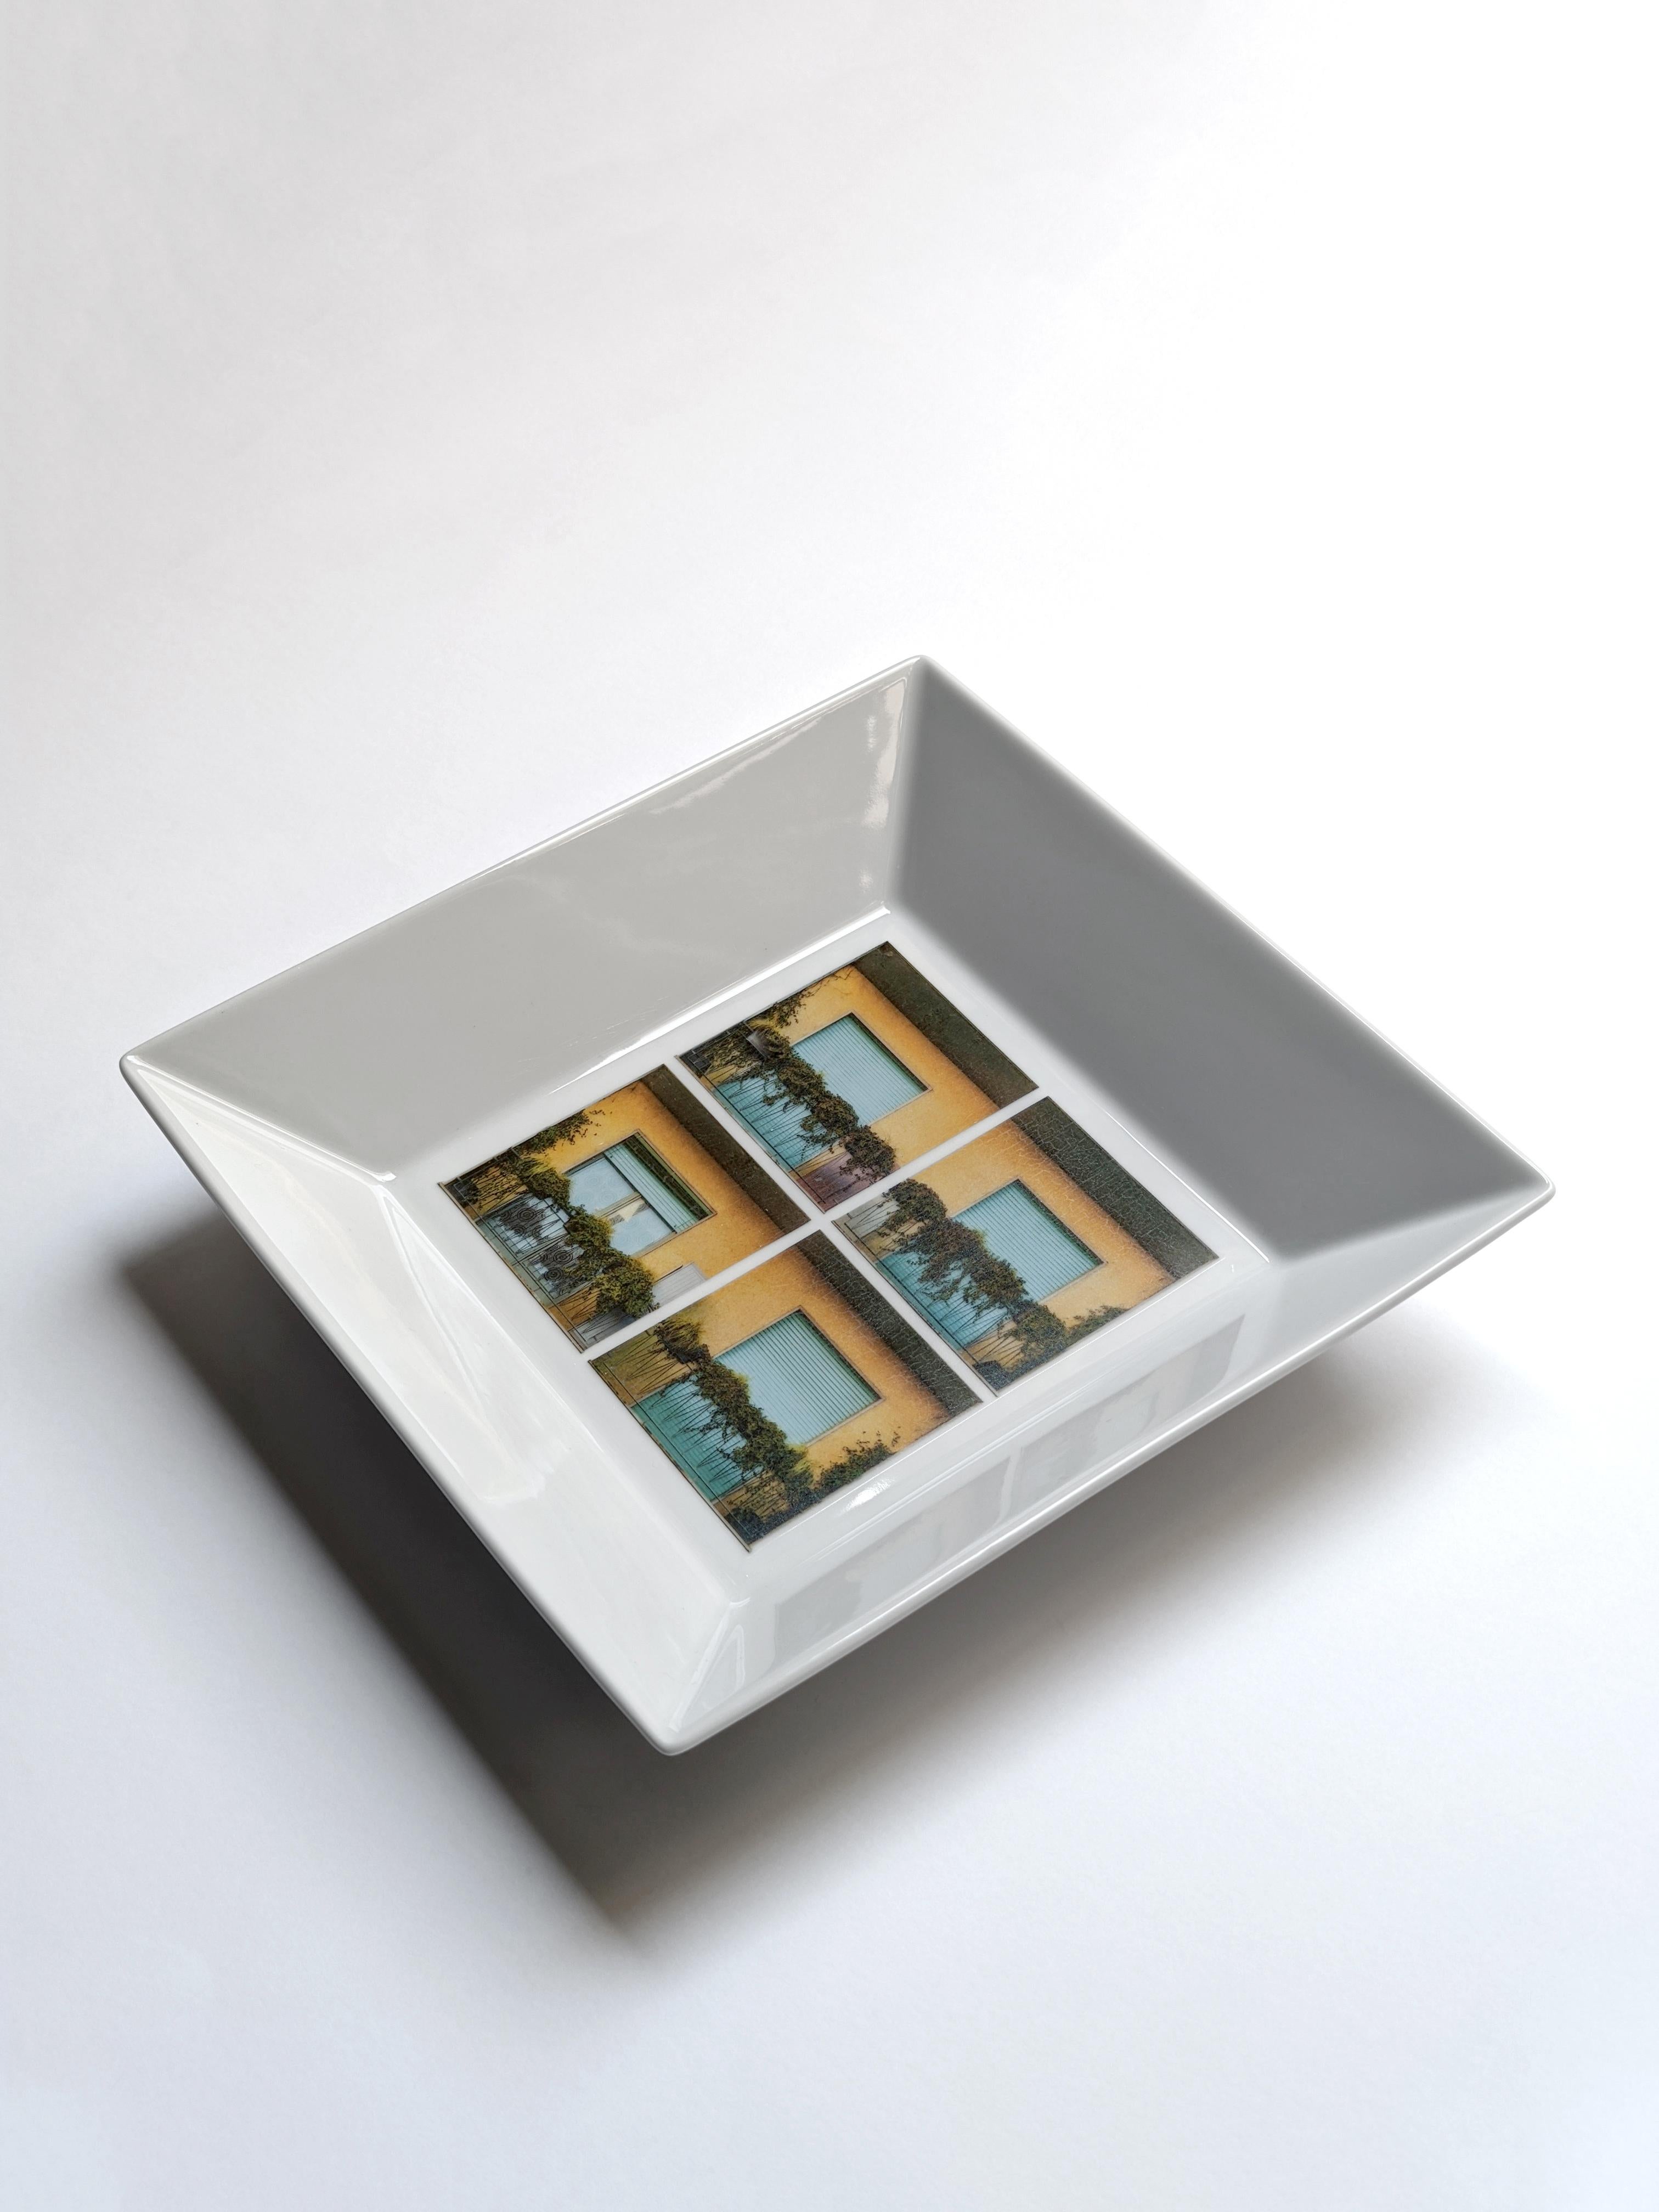 La Finestra sul Cortile is a collection of centrepieces and pocket empties with simple, square shapes on which various building facades are placed. The range of decors is broad: from the endless windows of the first skyscrapers to the typical